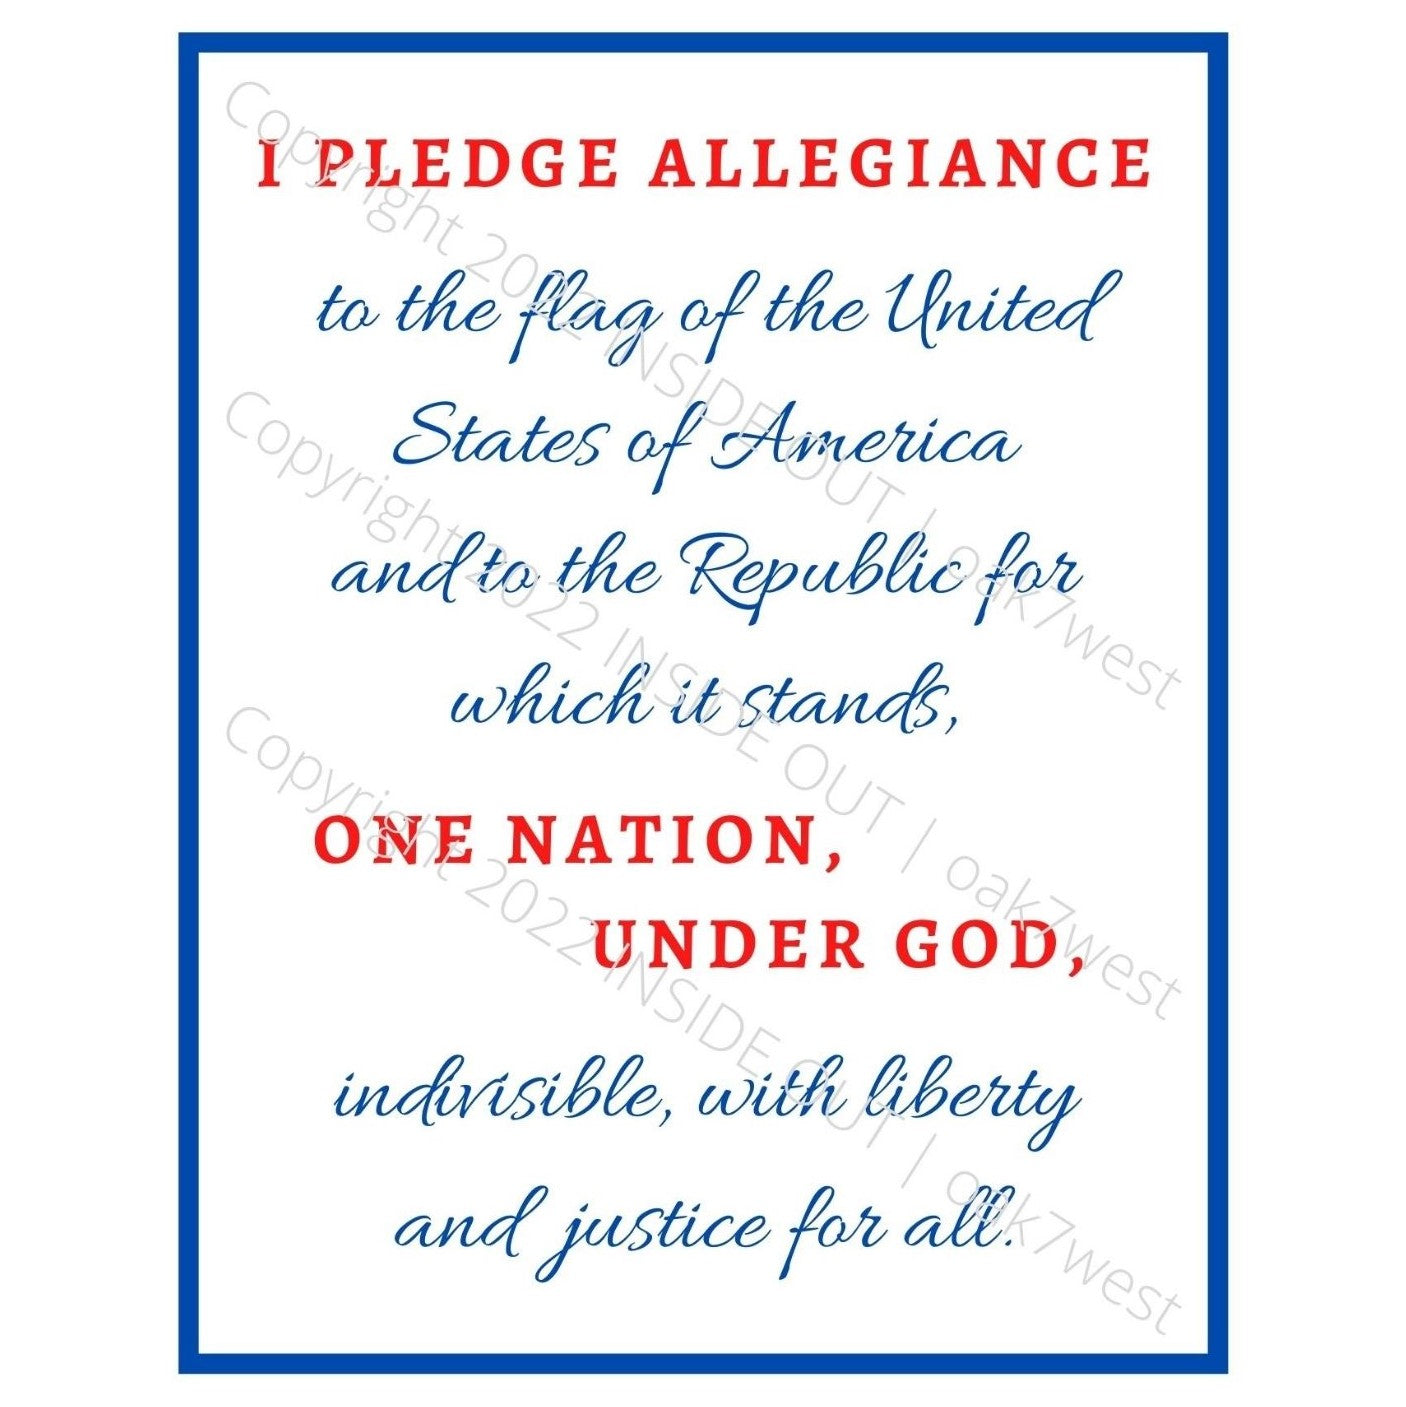 Patriotic Word Art - Pledge of Allegiance (FREE printable download) | The Pledge of Allegiance Word Art Reads... I PLEDGE ALLEGIANCE to the flag of the United States of America and to the Republic for which it stands, ONE NATION, UNDER GOD, indivisible, with liberty and justice for all. | Shown in Color (Red, White, & Blue) with Blue Border | oak7west.com